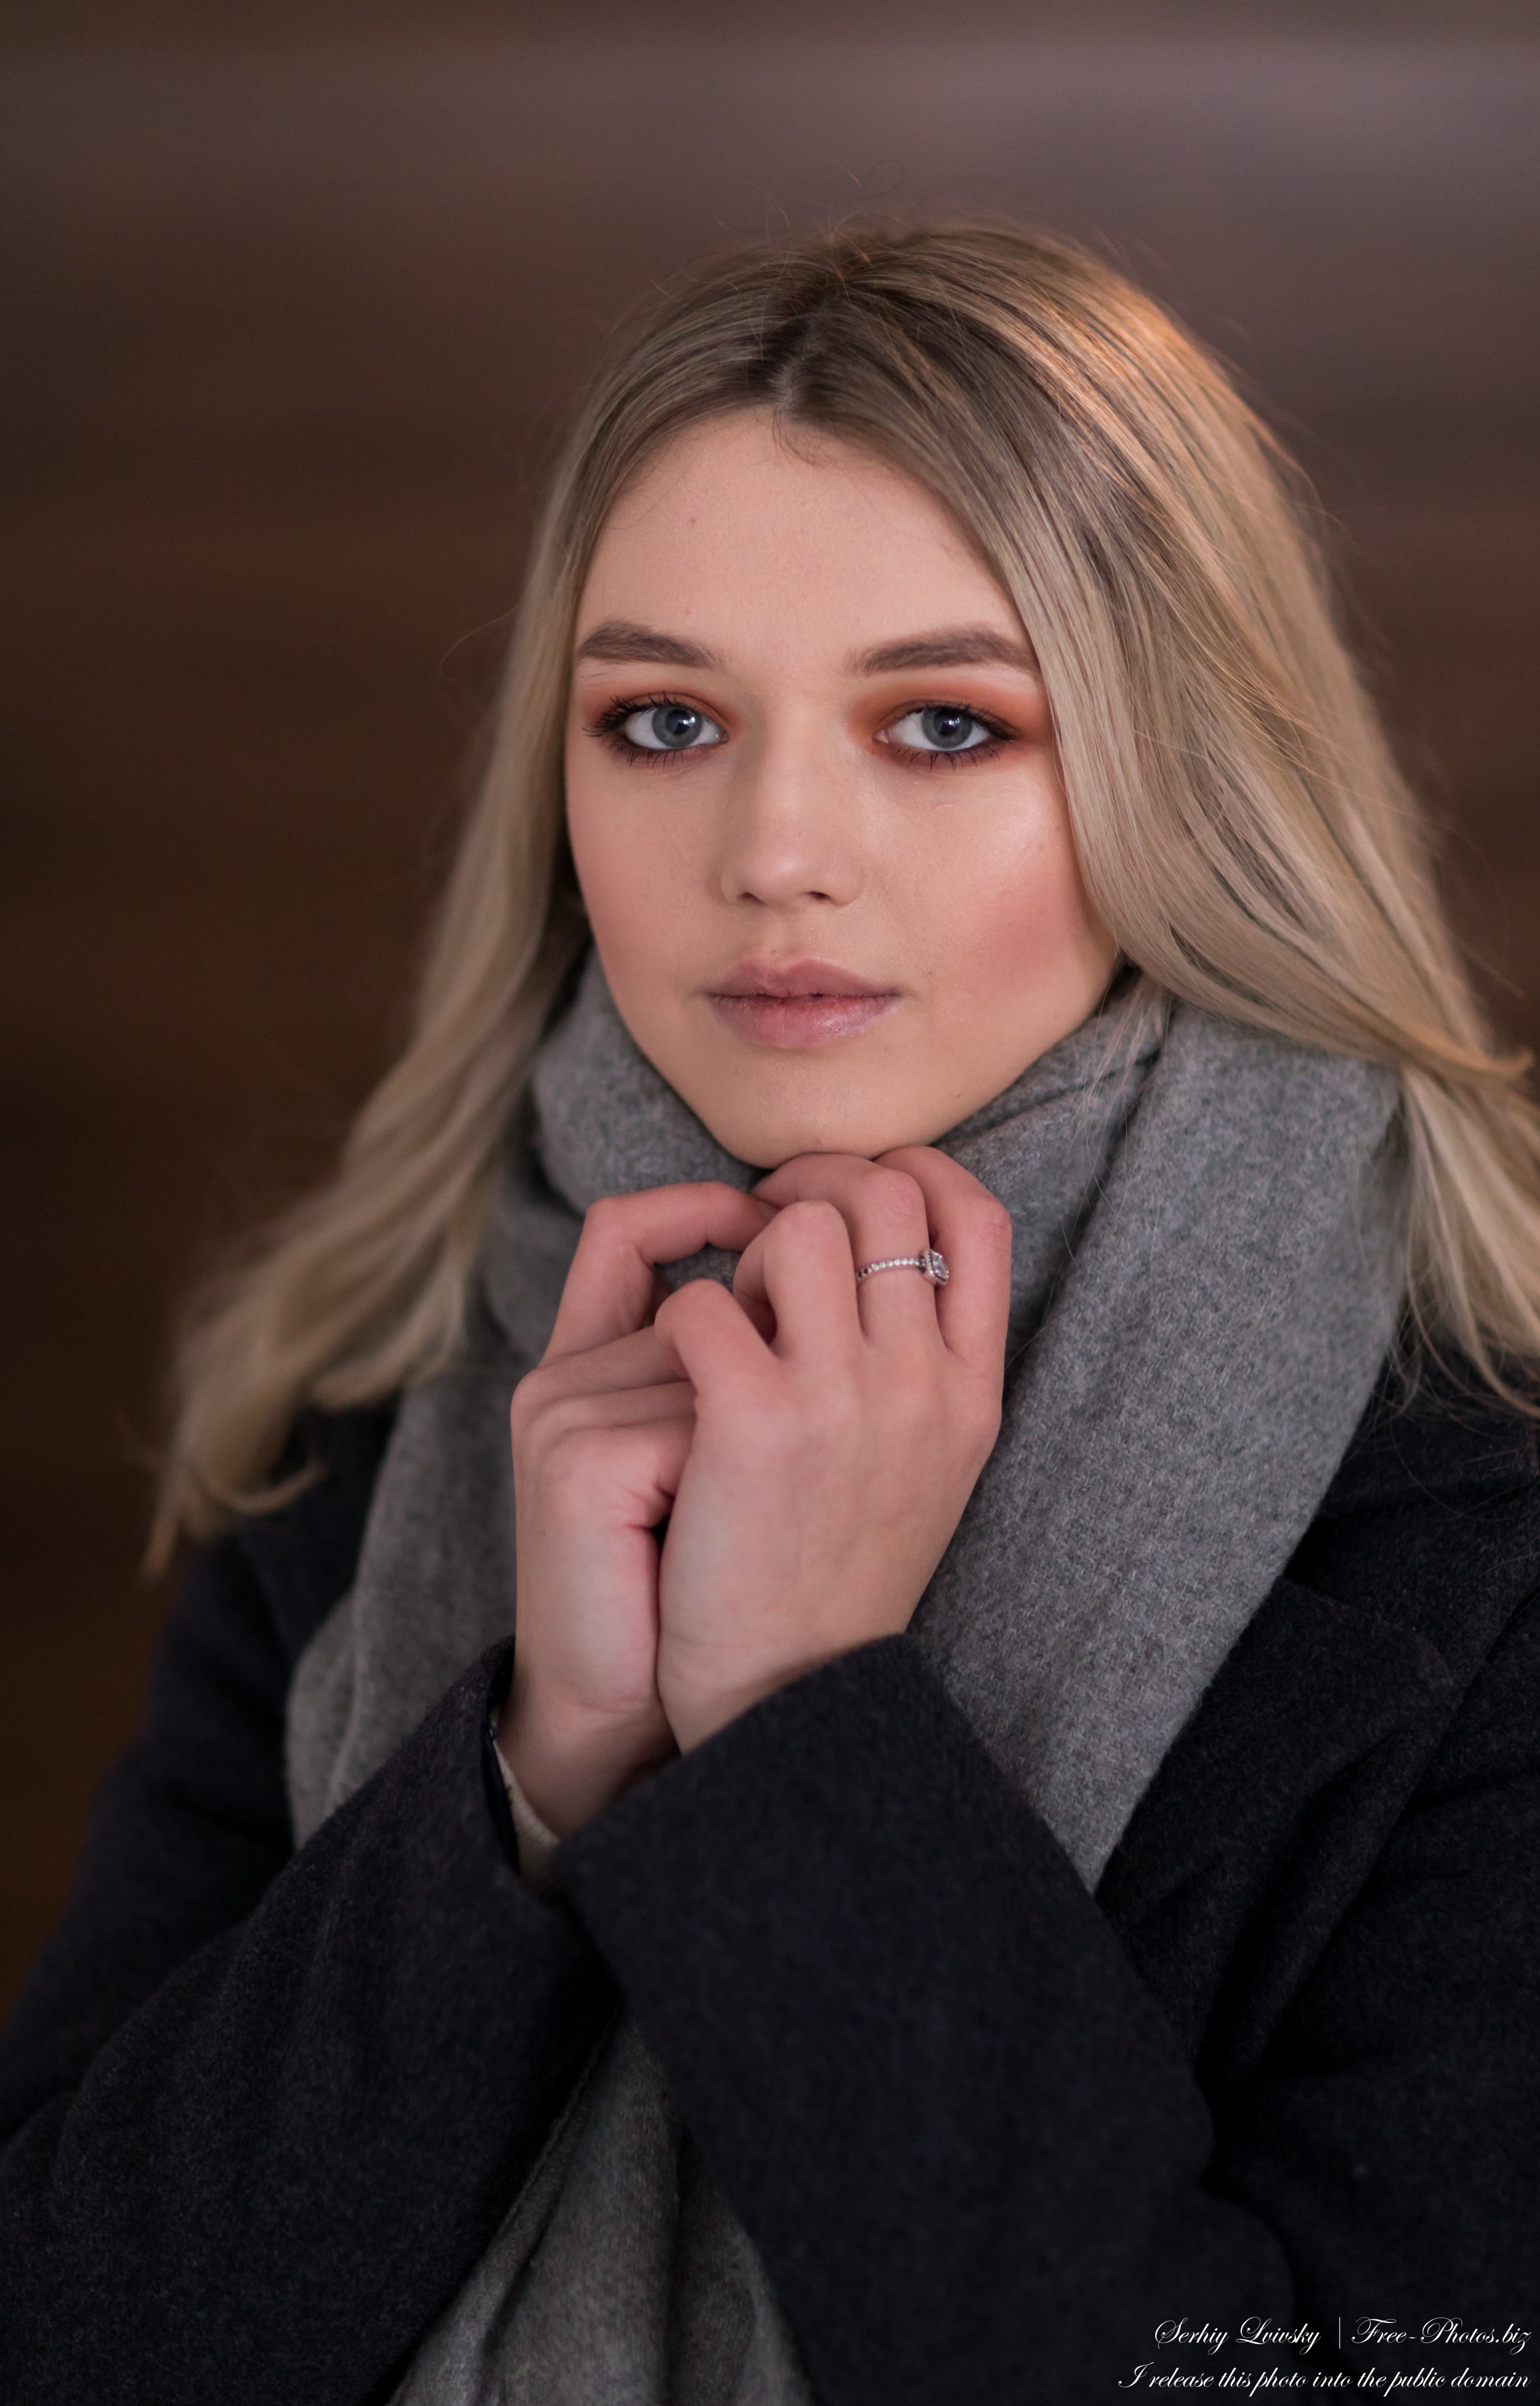 Photo Of Irena An 18 Year Old Girl Photographed In December 2020 By Serhiy Lvivsky Picture 21